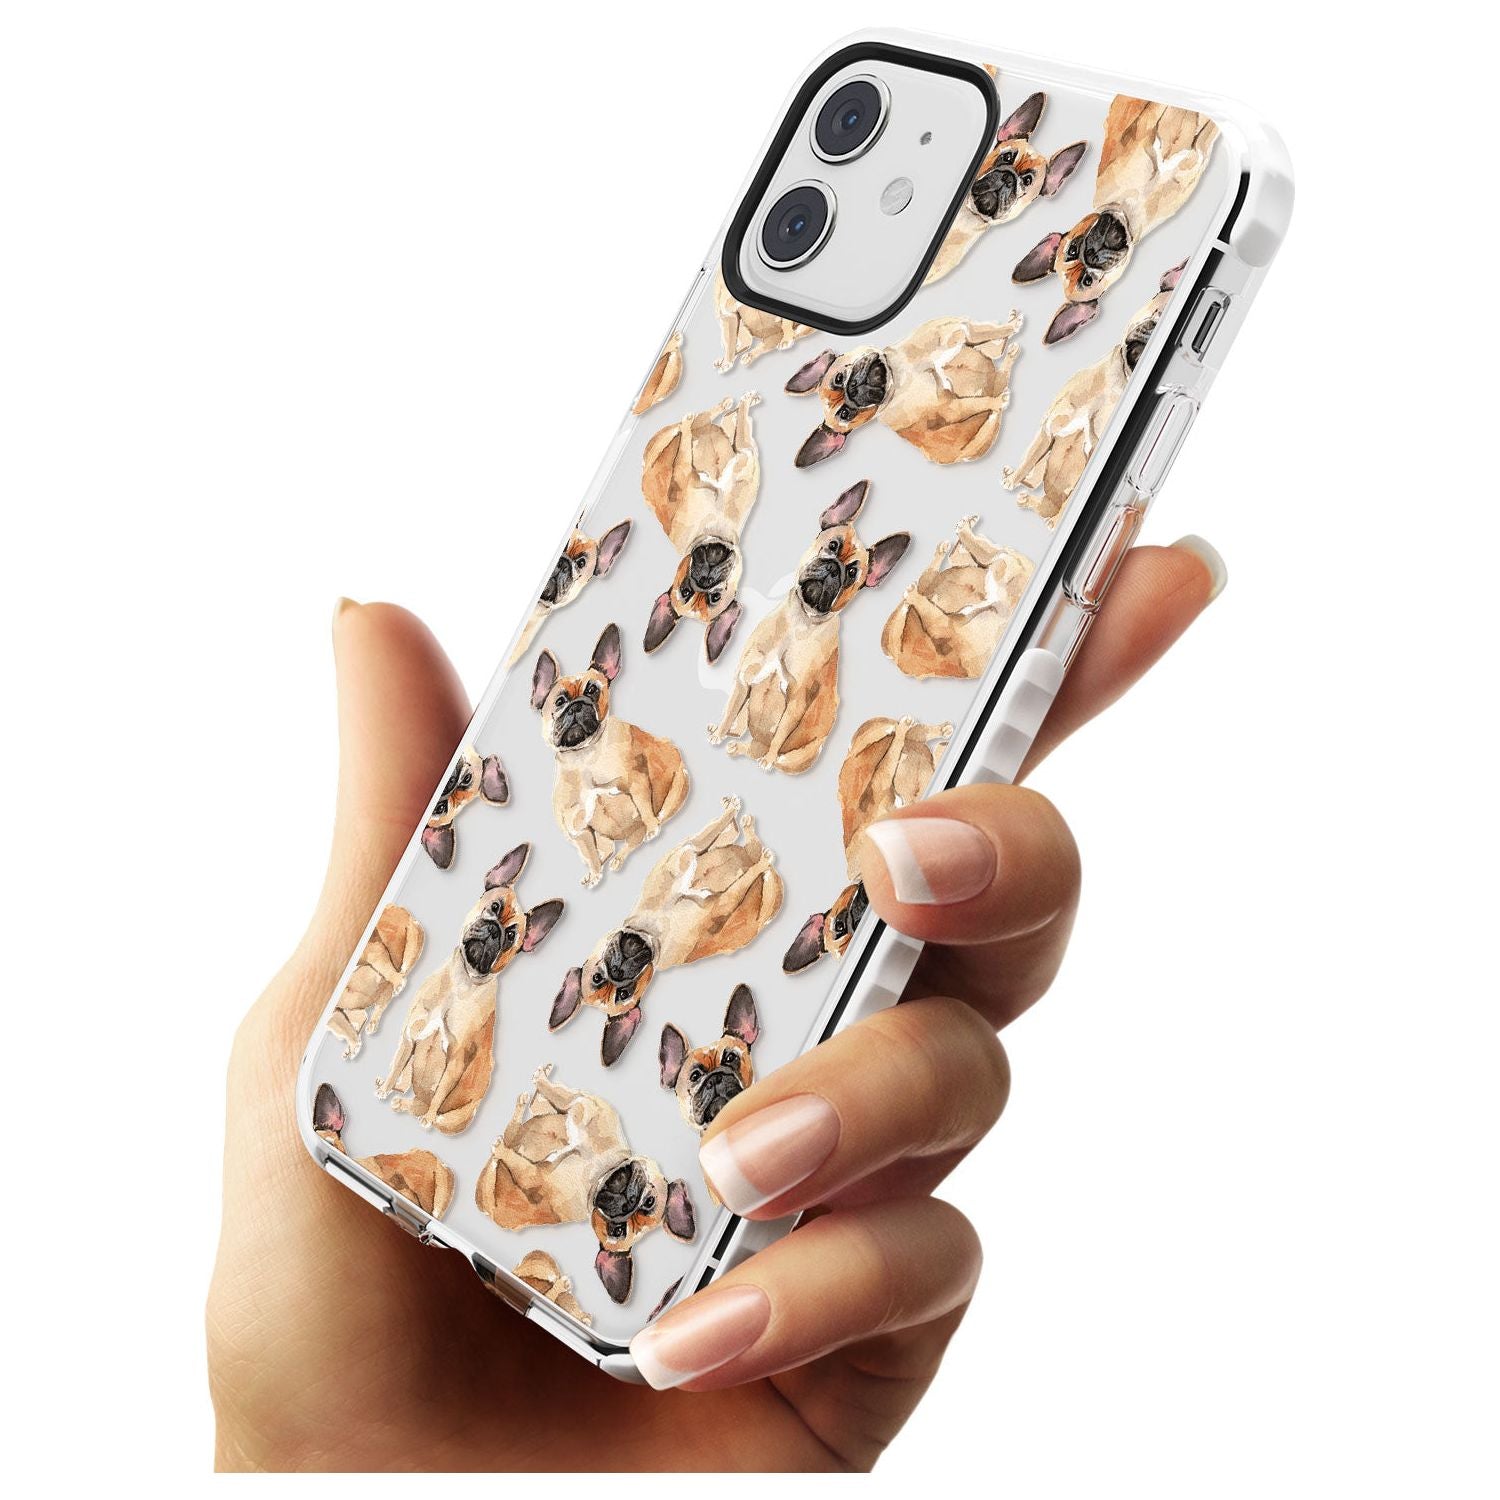 French Bulldog Watercolour Dog Pattern Impact Phone Case for iPhone 11